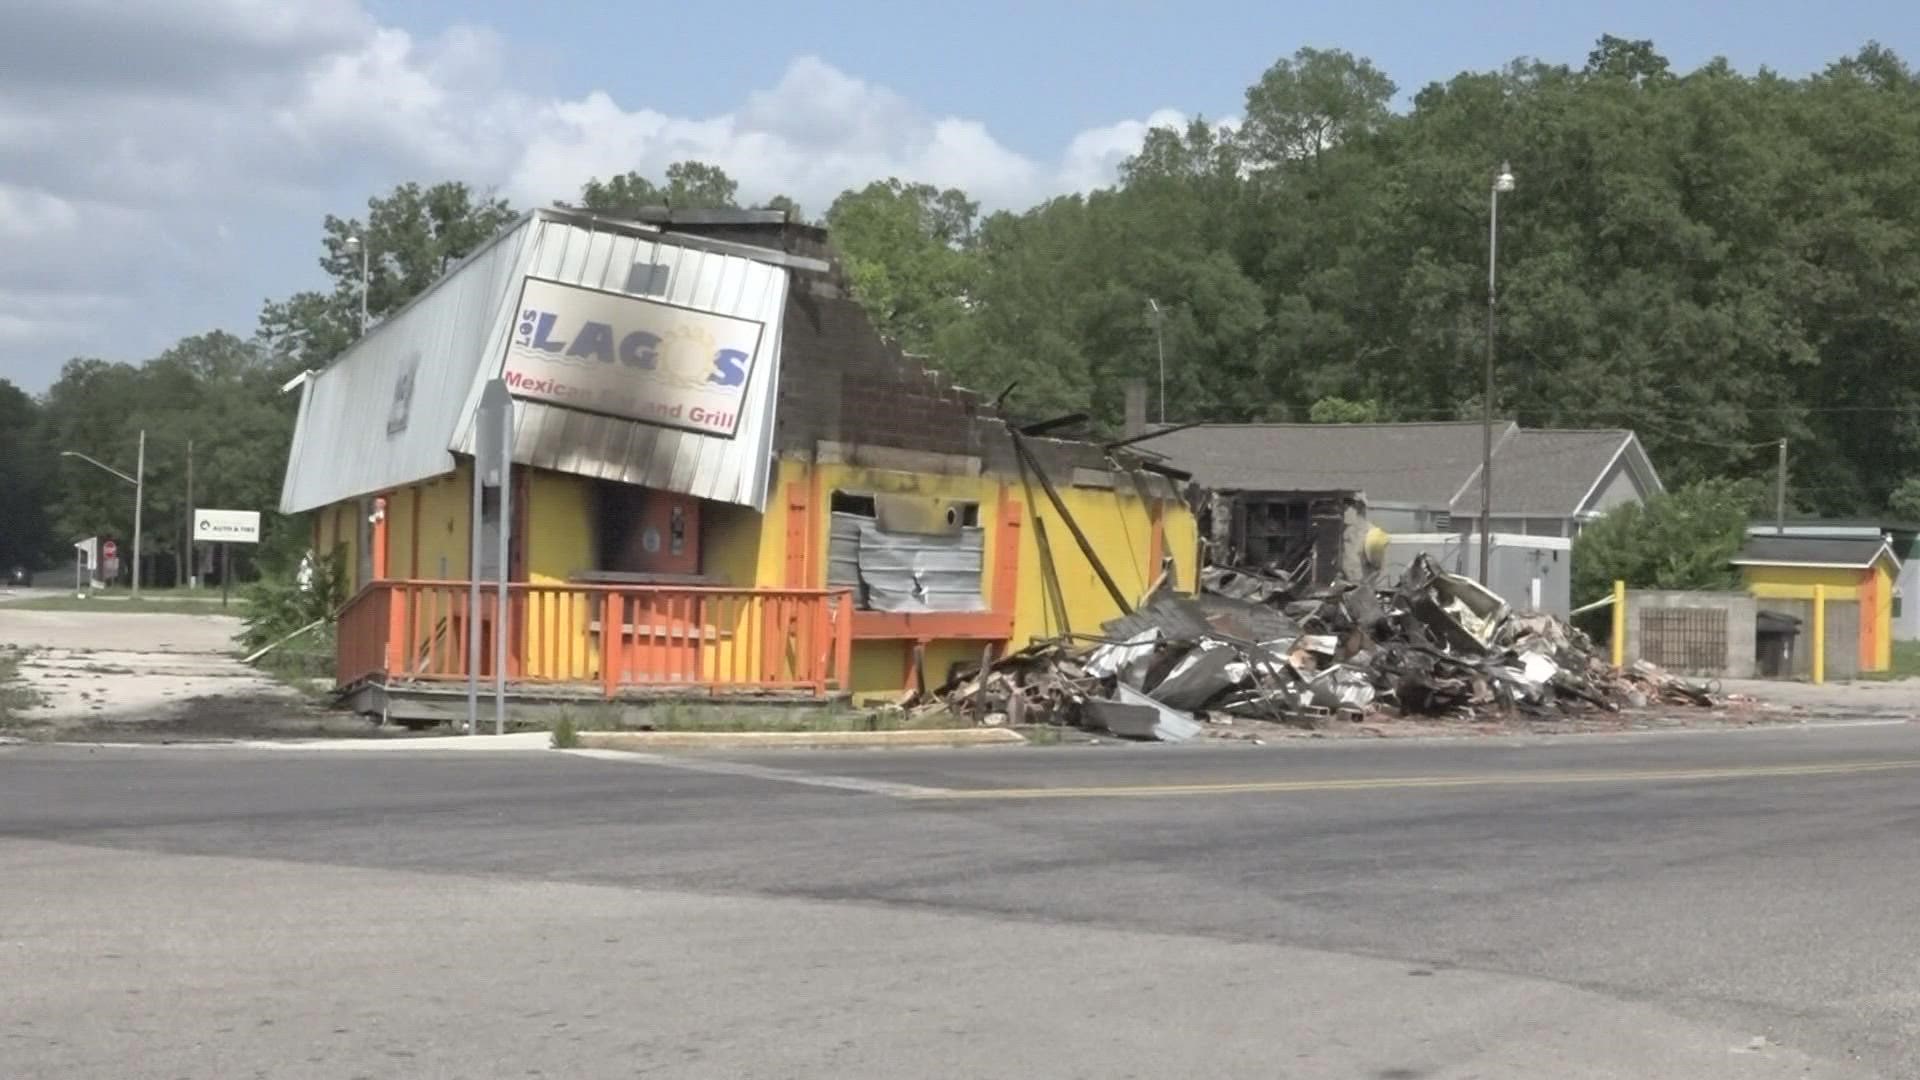 Los Lagos, a taco restaurant in Muskegon county, went up in flames this weekend.